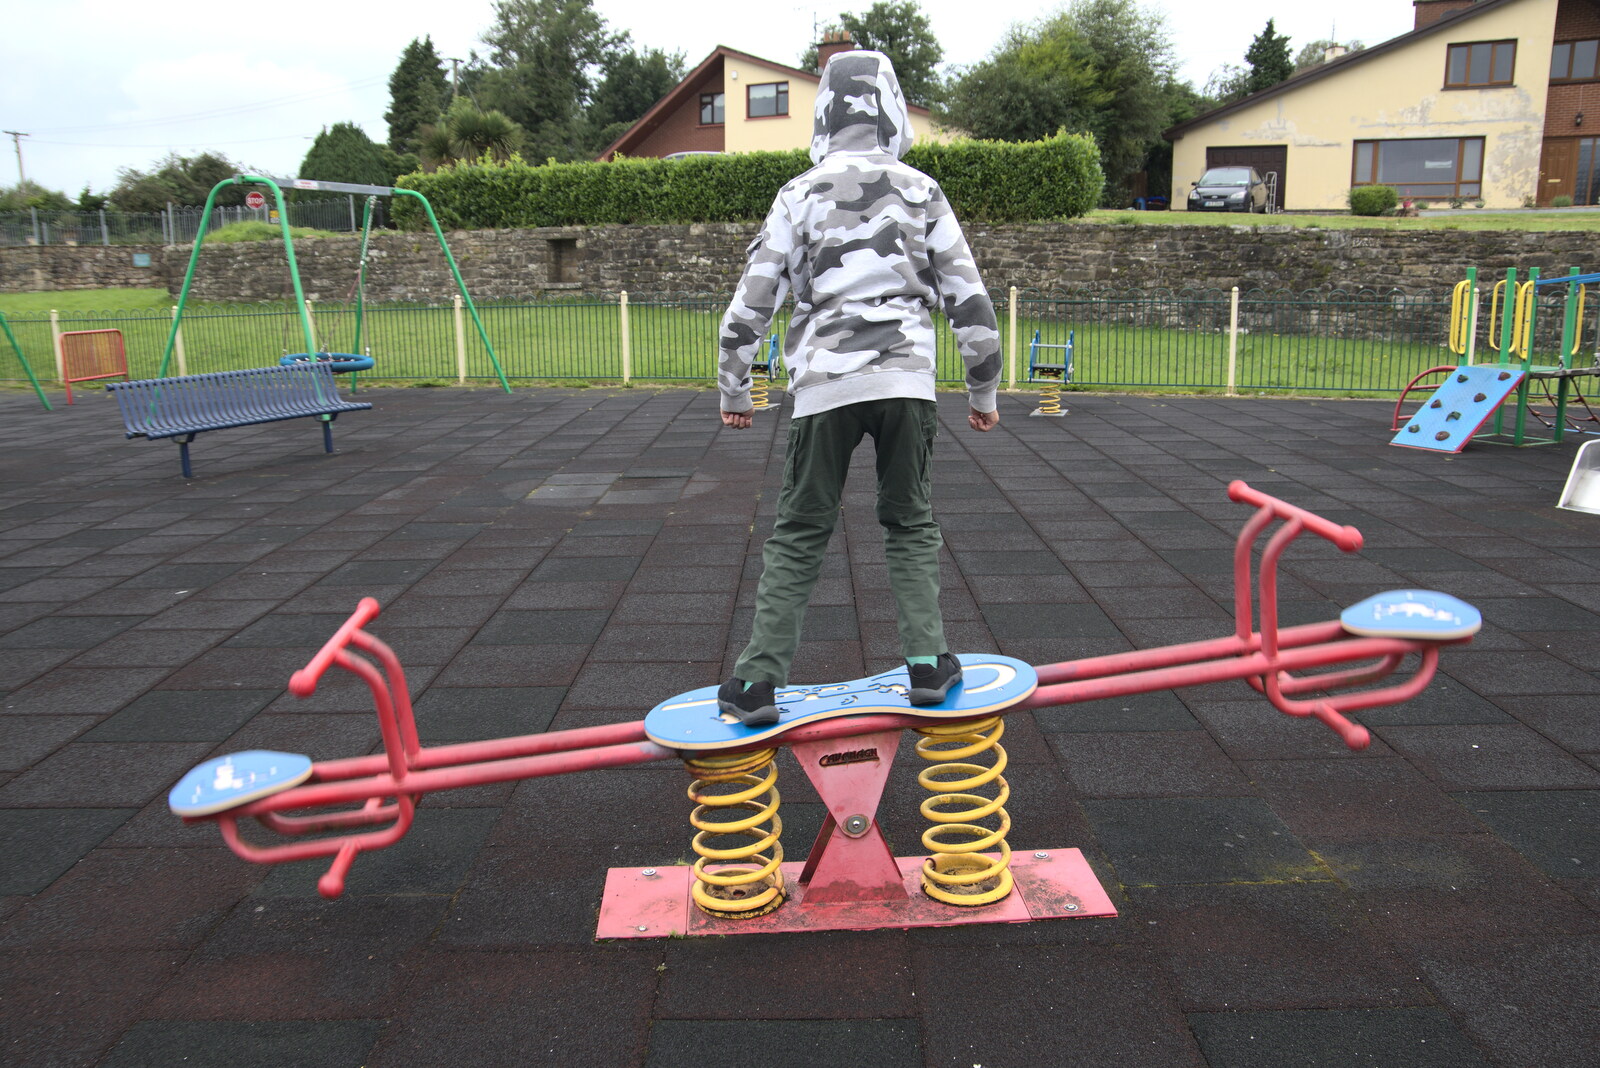 Harry on a seesaw from Manorhamilton and the Street Art of Dún Laoghaire, Ireland - 15th August 2021